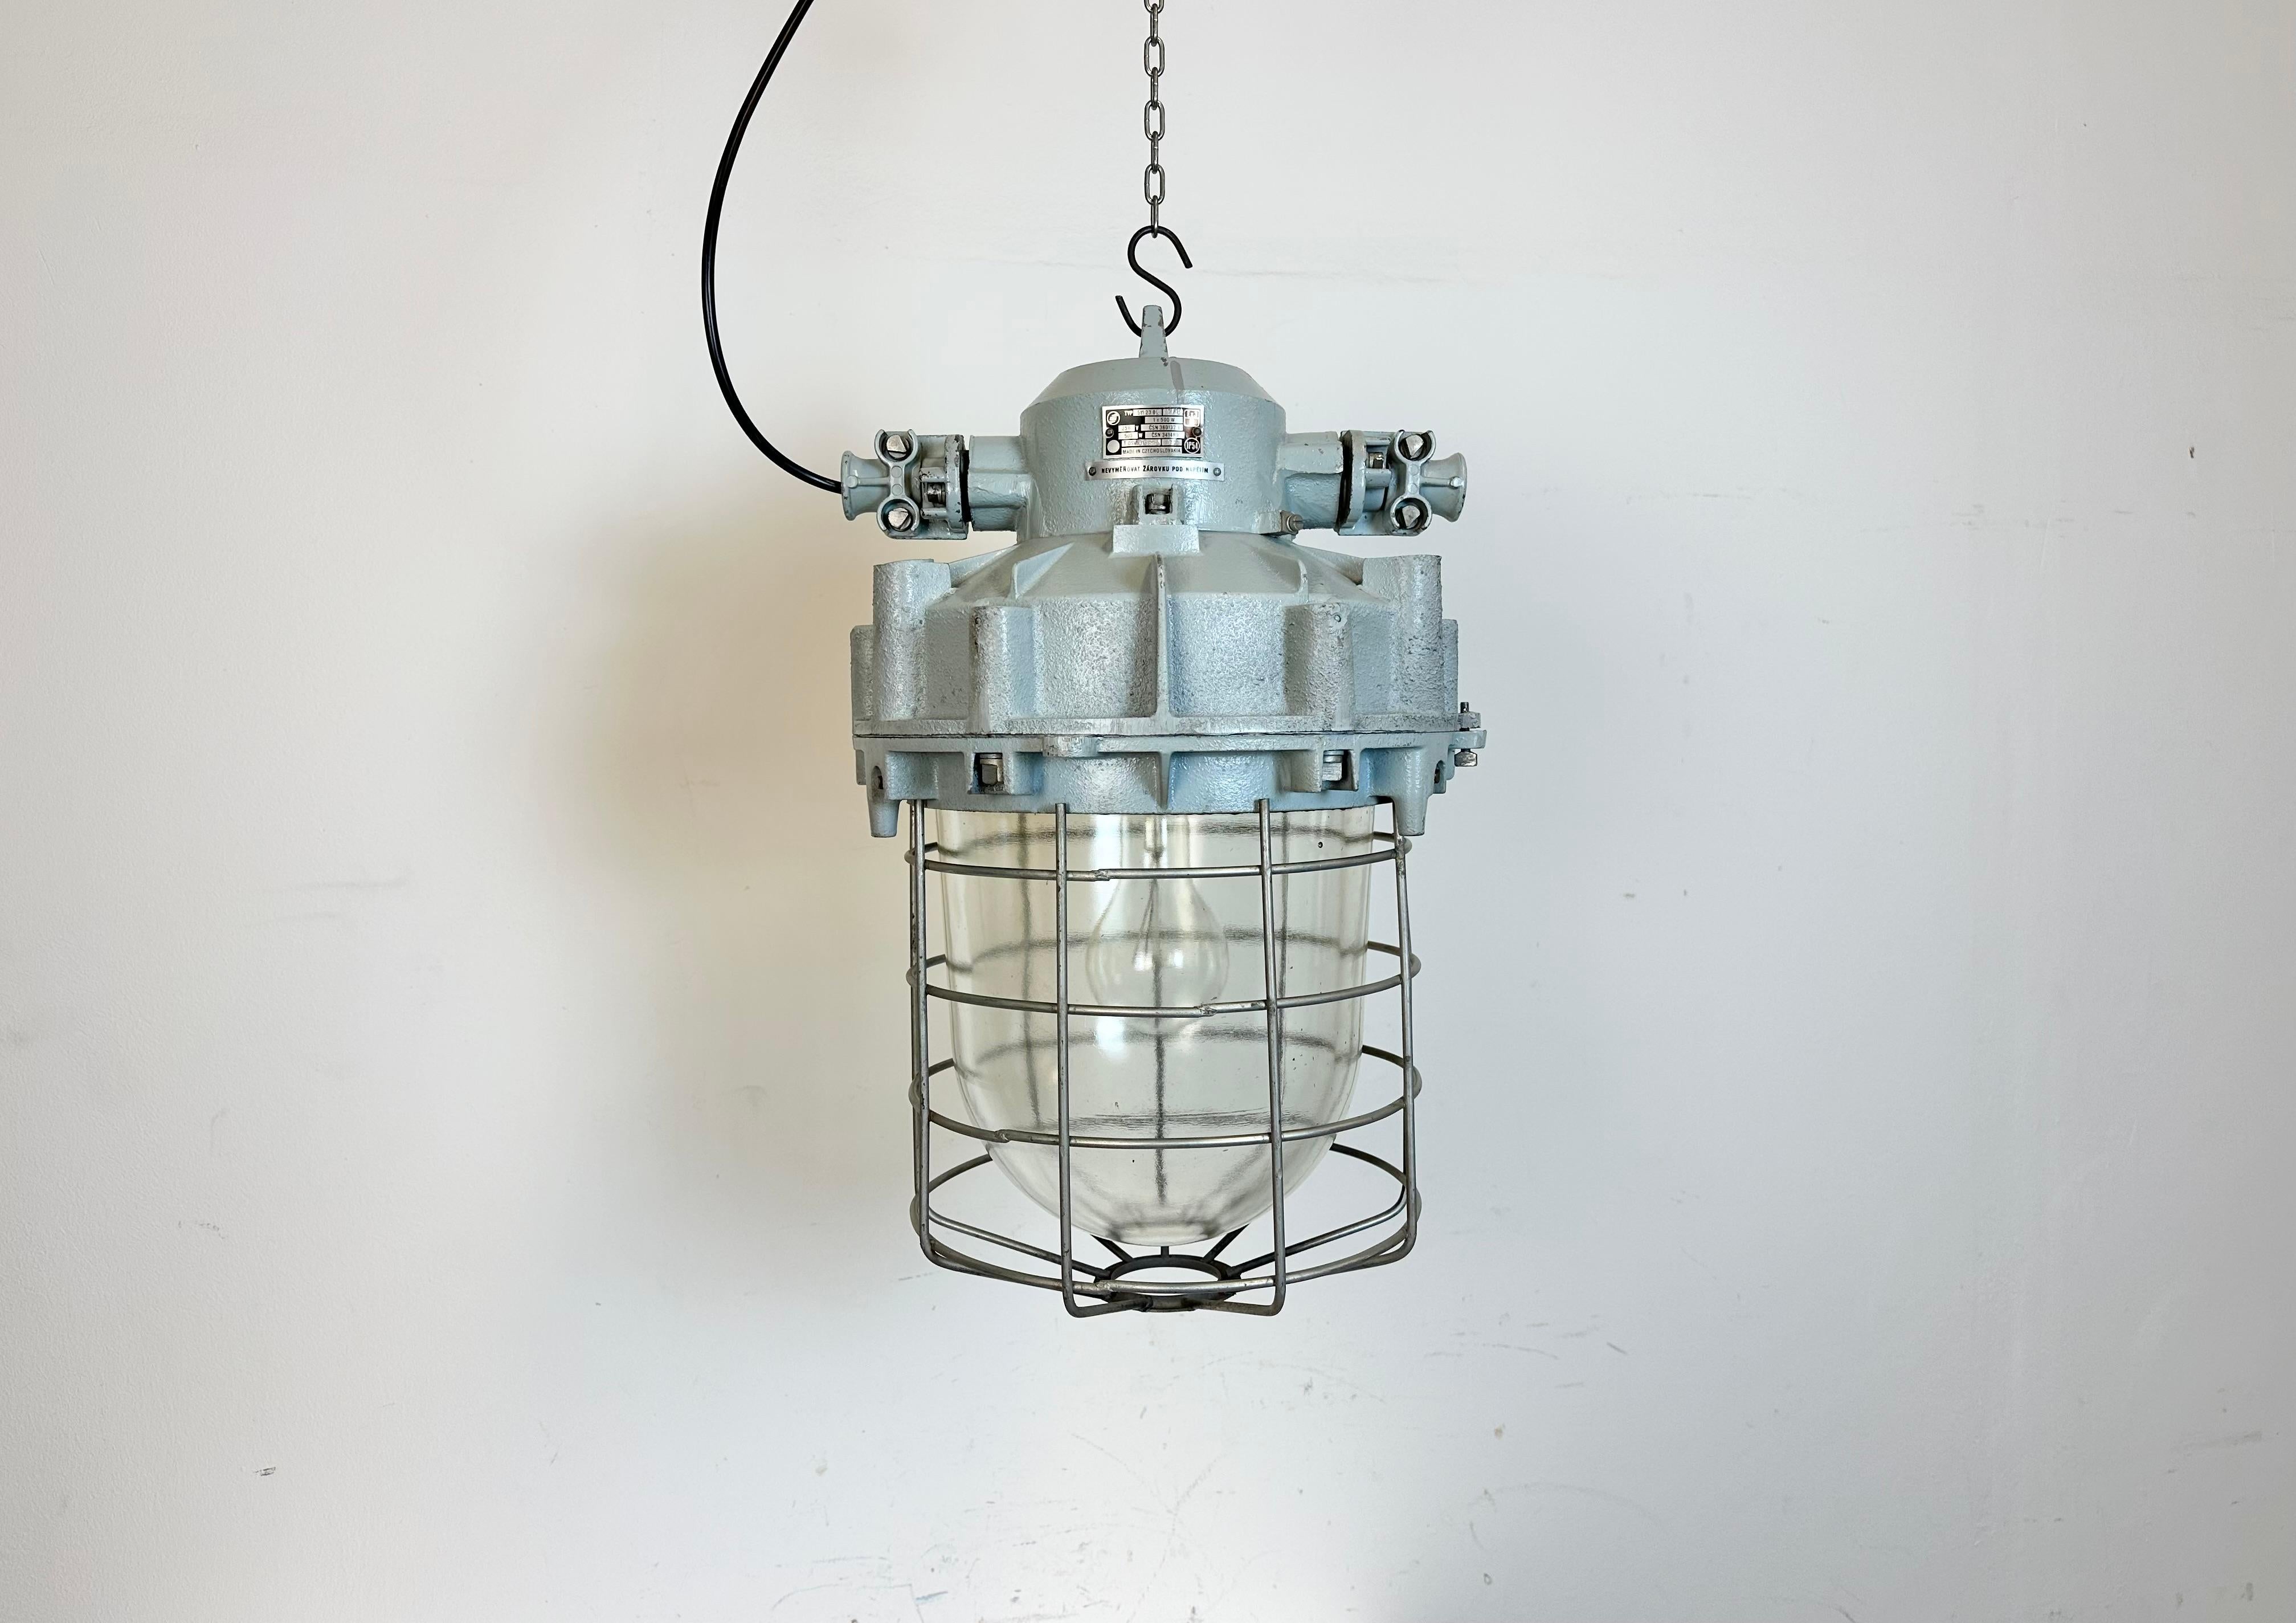 Industrial factory hanging light designed in 1970s and produced till 1990s by Elektrosvit in former Czechoslovakia. It features a cast aluminium body, an iron cage and explosion-proof glass.
The socket requires standard E27 / E26 lightbulbs. New